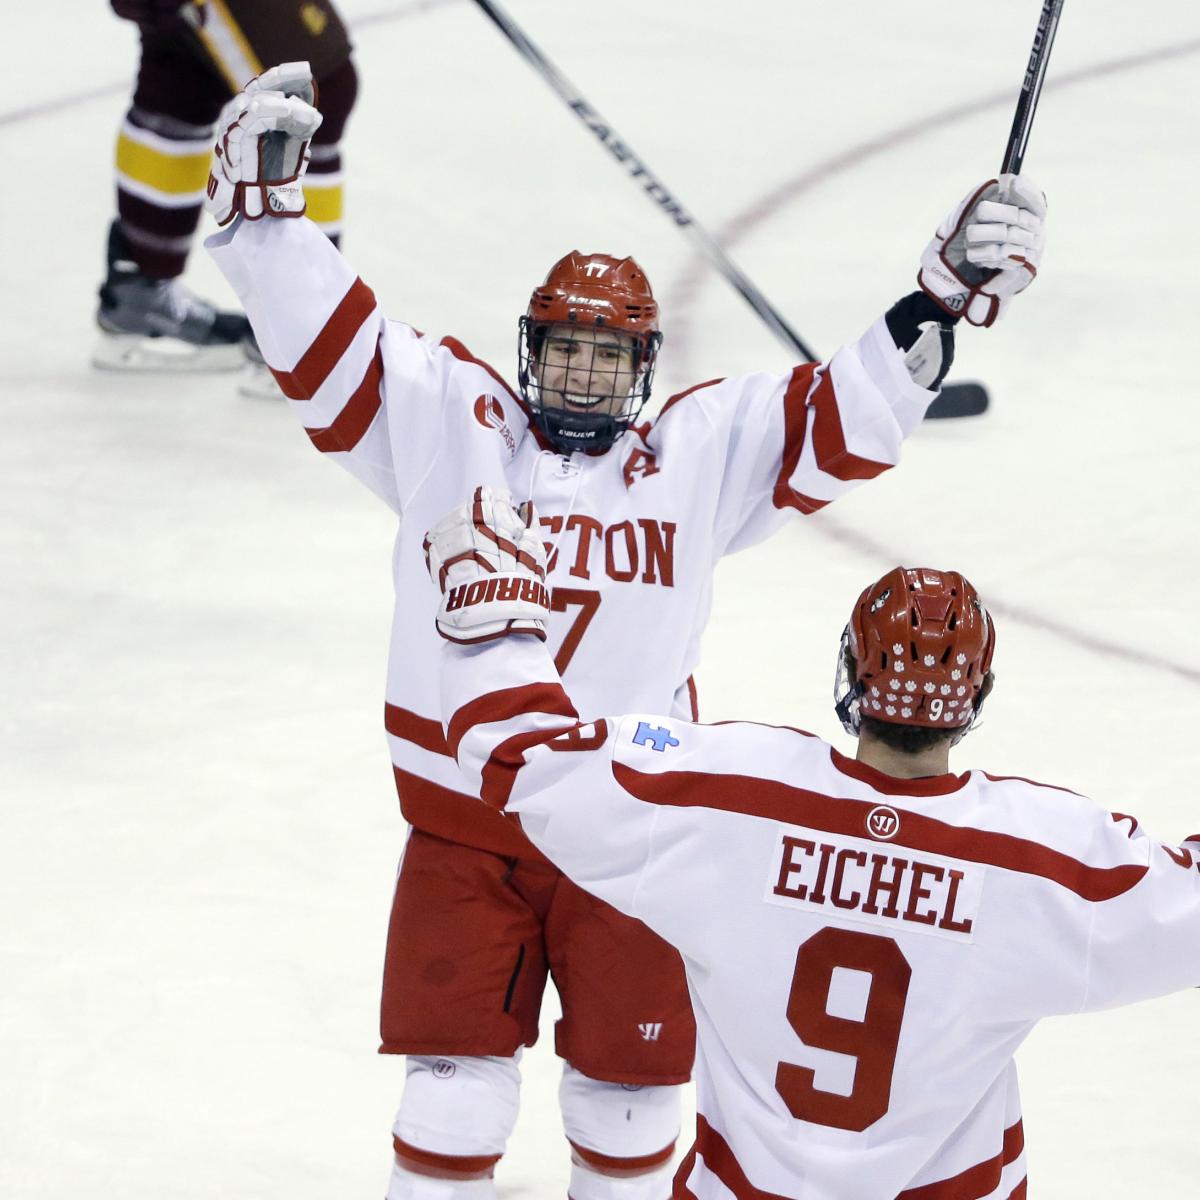 Frozen Four 2015 NCAA Hockey Championship Bracket and Predictions